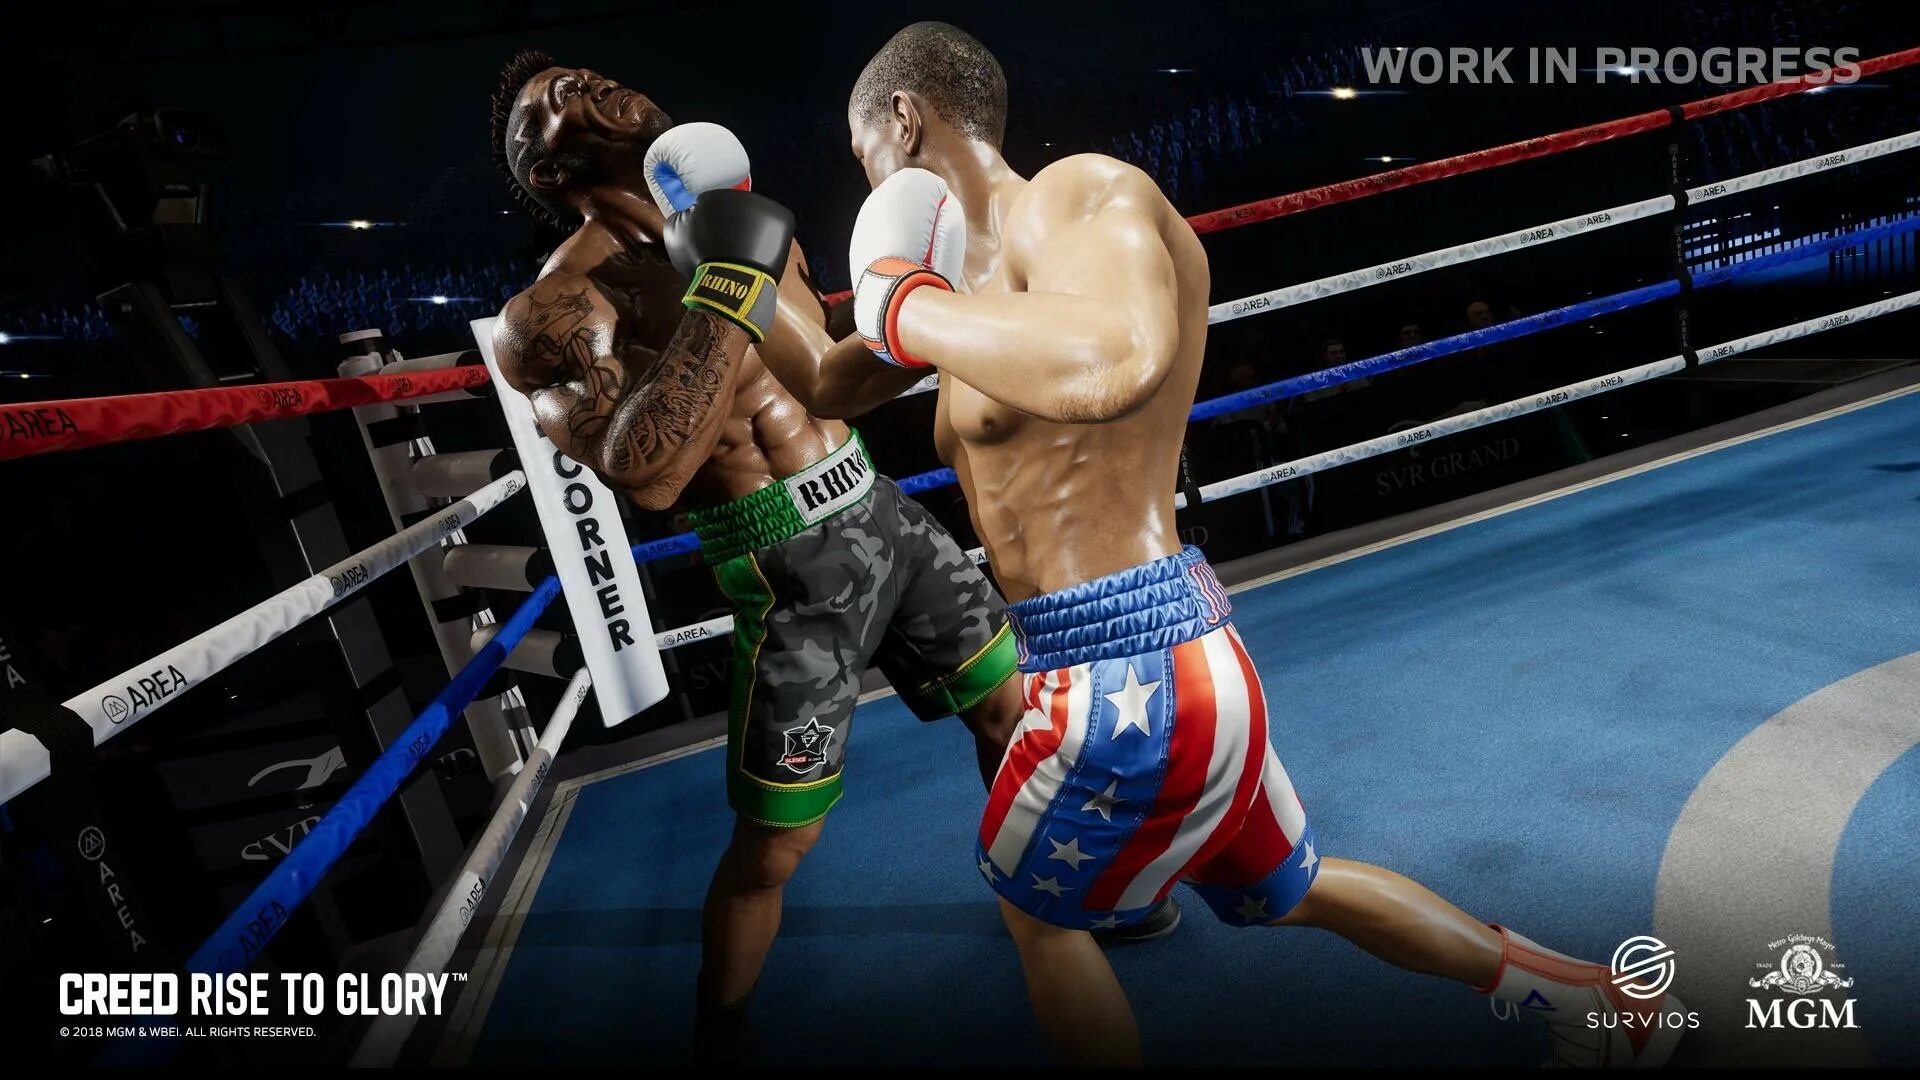 Creed VR ps4. Creed: Rise to Glory (2018). Creed Rise to Glory VR. Creed Rise to Glory ps4. Глори бокс